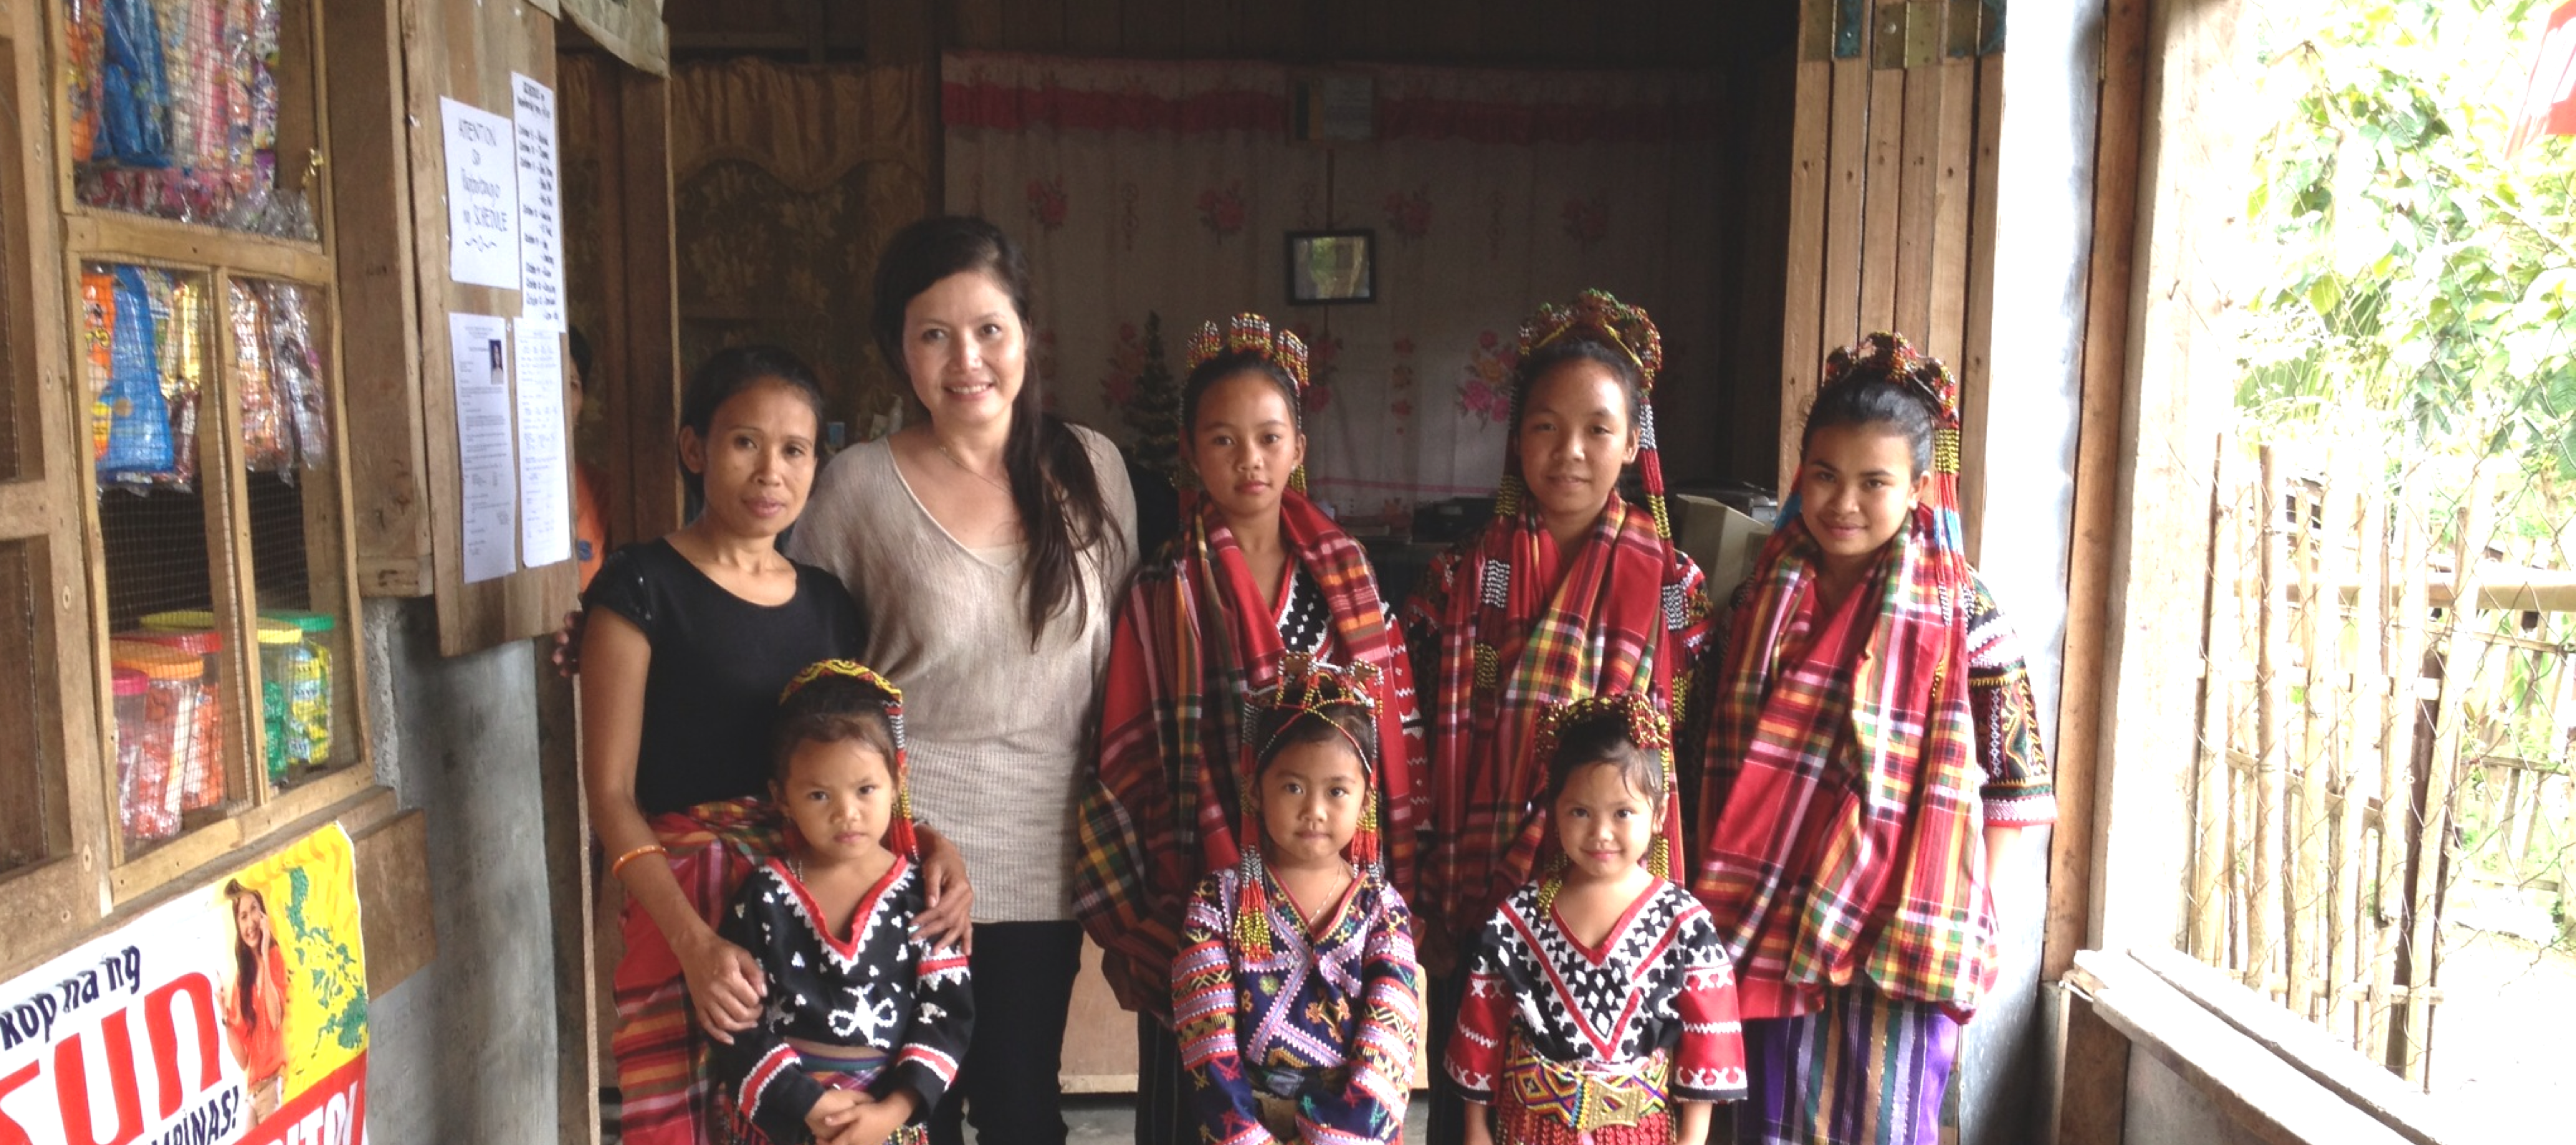 A photo of the founder of Four Truffles with a group of four young women and three young girls of The T’boli Tribe in the Philippines